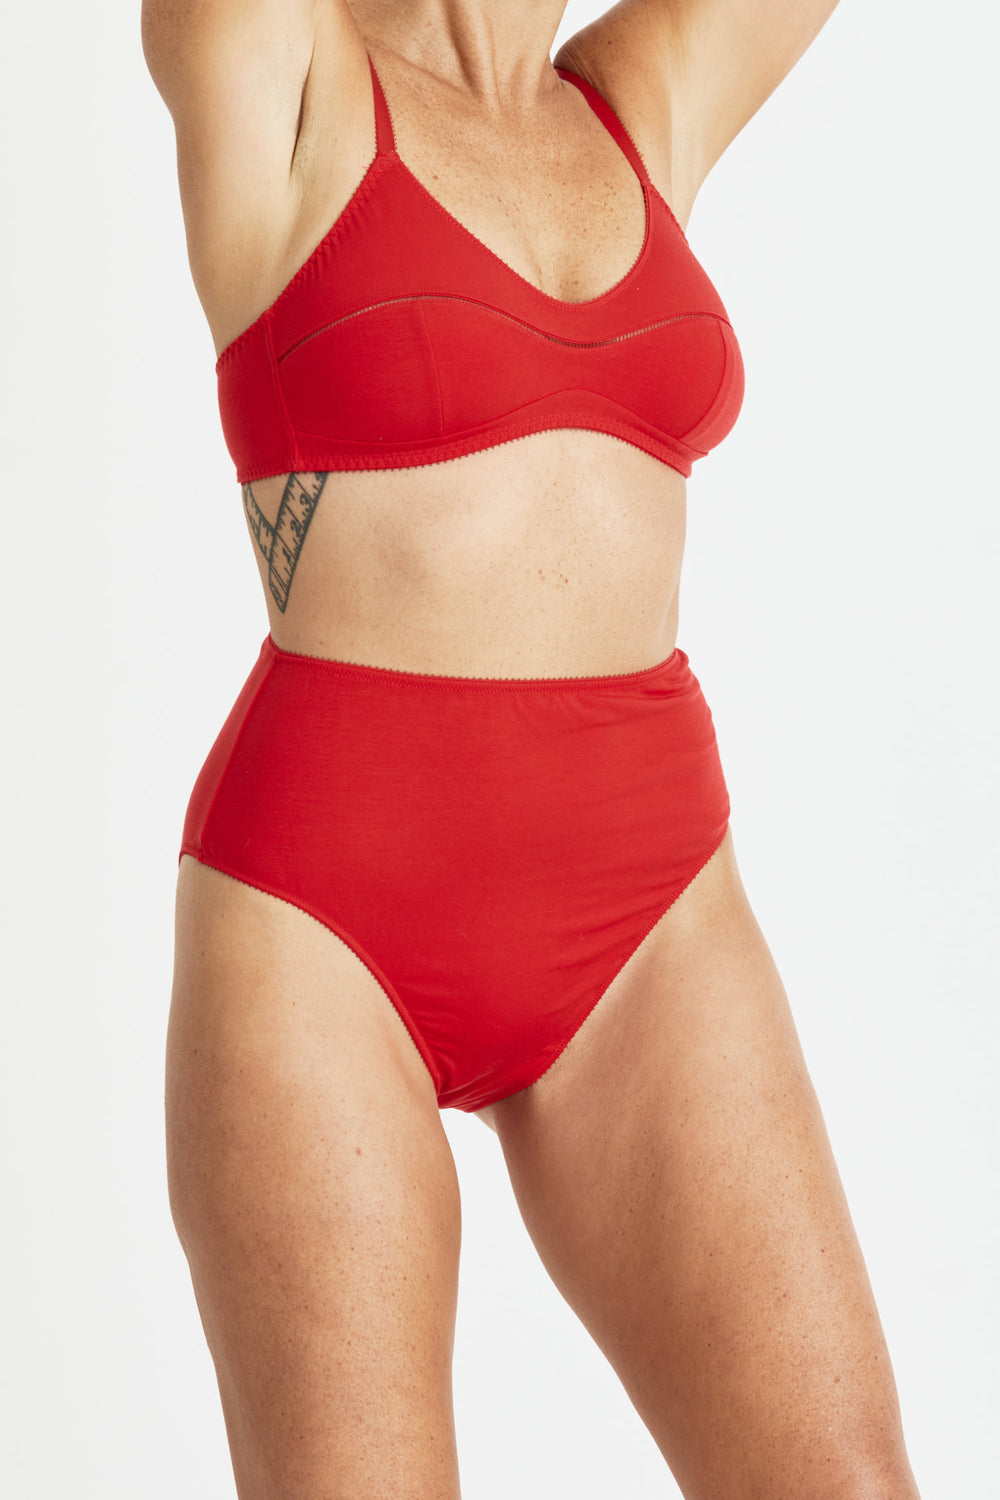 Videris Lingerie Maggie underwire free soft cup bra in red TENCEL™ with ladderstitch detail and scooped neckline